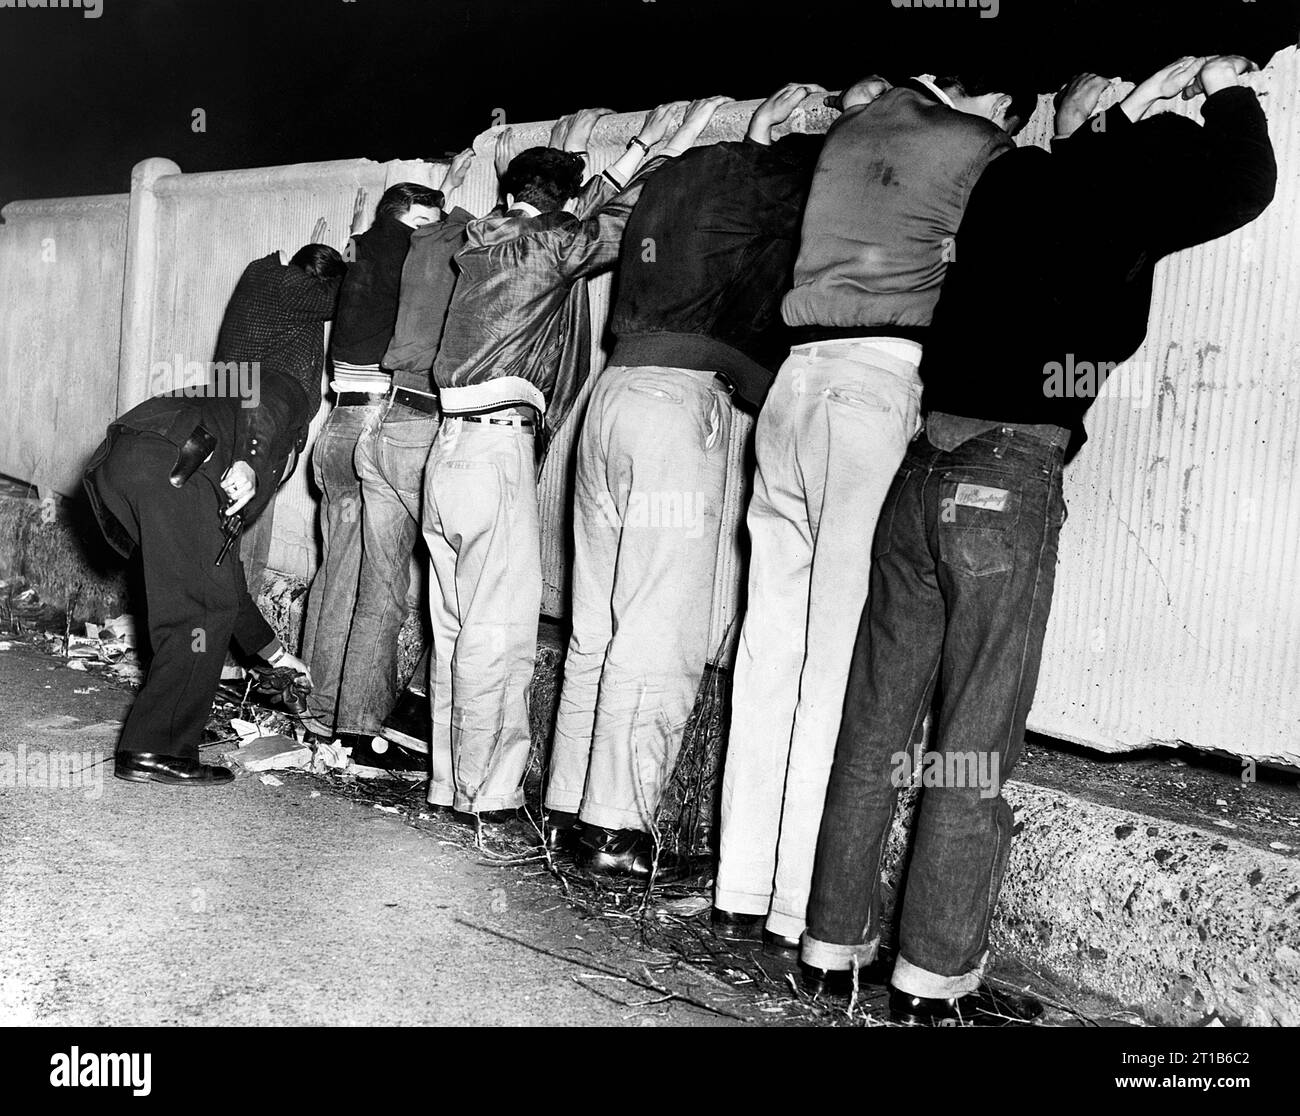 Seven men line up on fence as they are frisked by a policeman, Pacific St. between Carlton and Vanderbilt Avenues, Brooklyn, New York City, New York, USA, Orlando Fernandez, New York World-Telegram and the Sun Newspaper Photograph Collection, 1956 Stock Photo